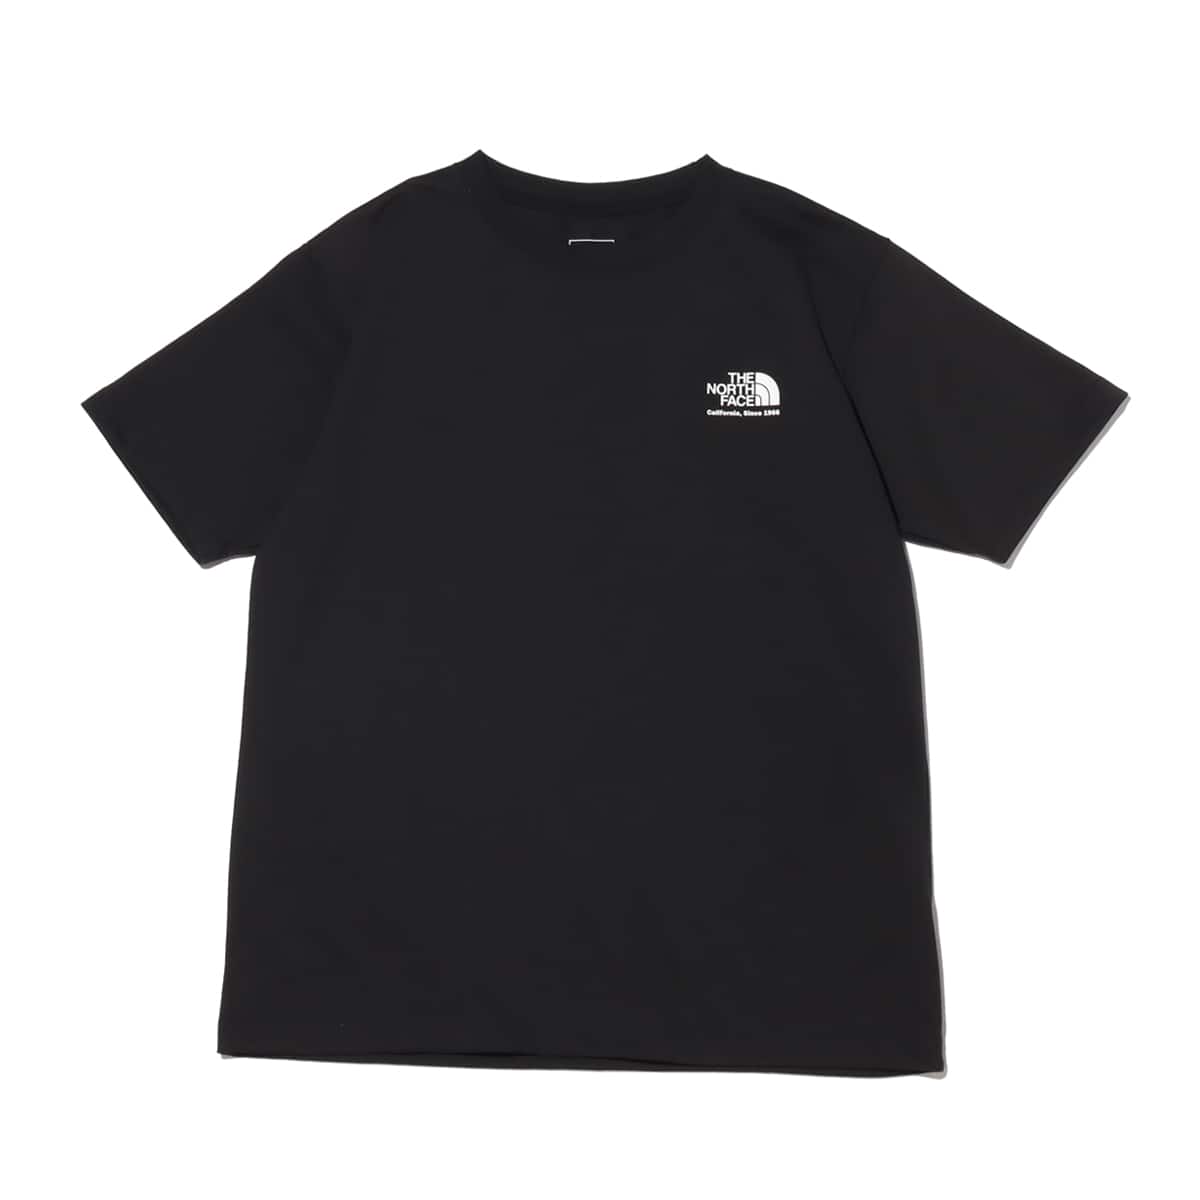 THE NORTH FACE S/S HISTORICAL LOGO TEE BLACK 22SS-I